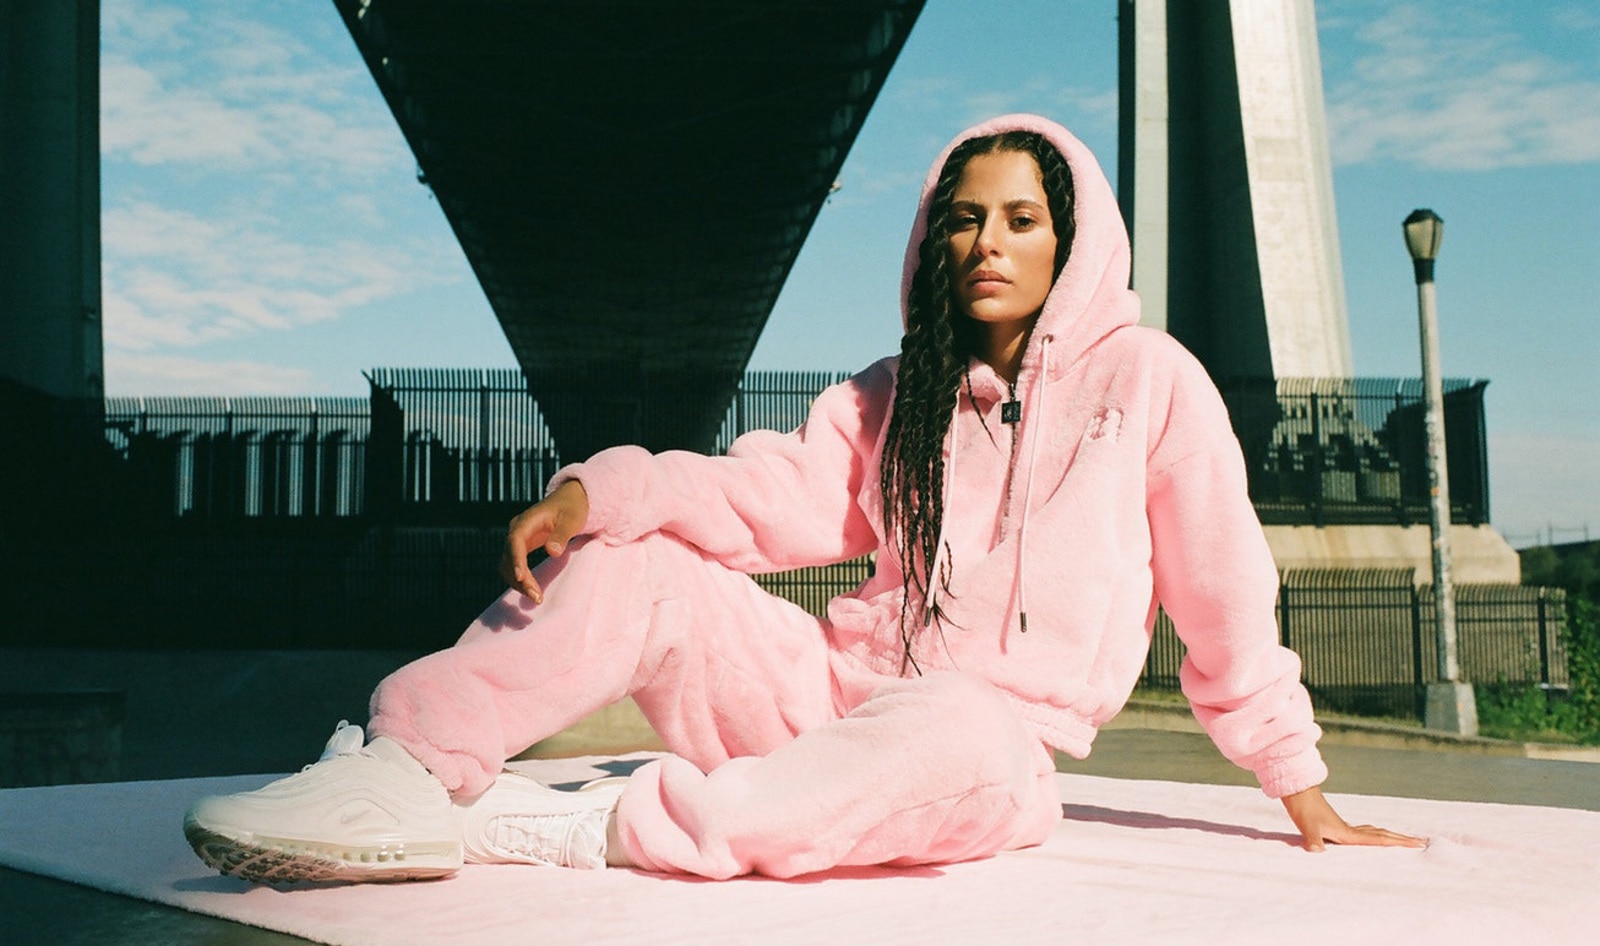 Juicy Couture Partners with Vegan Fashion Label to Launch Cozy Faux Fur Tracksuits